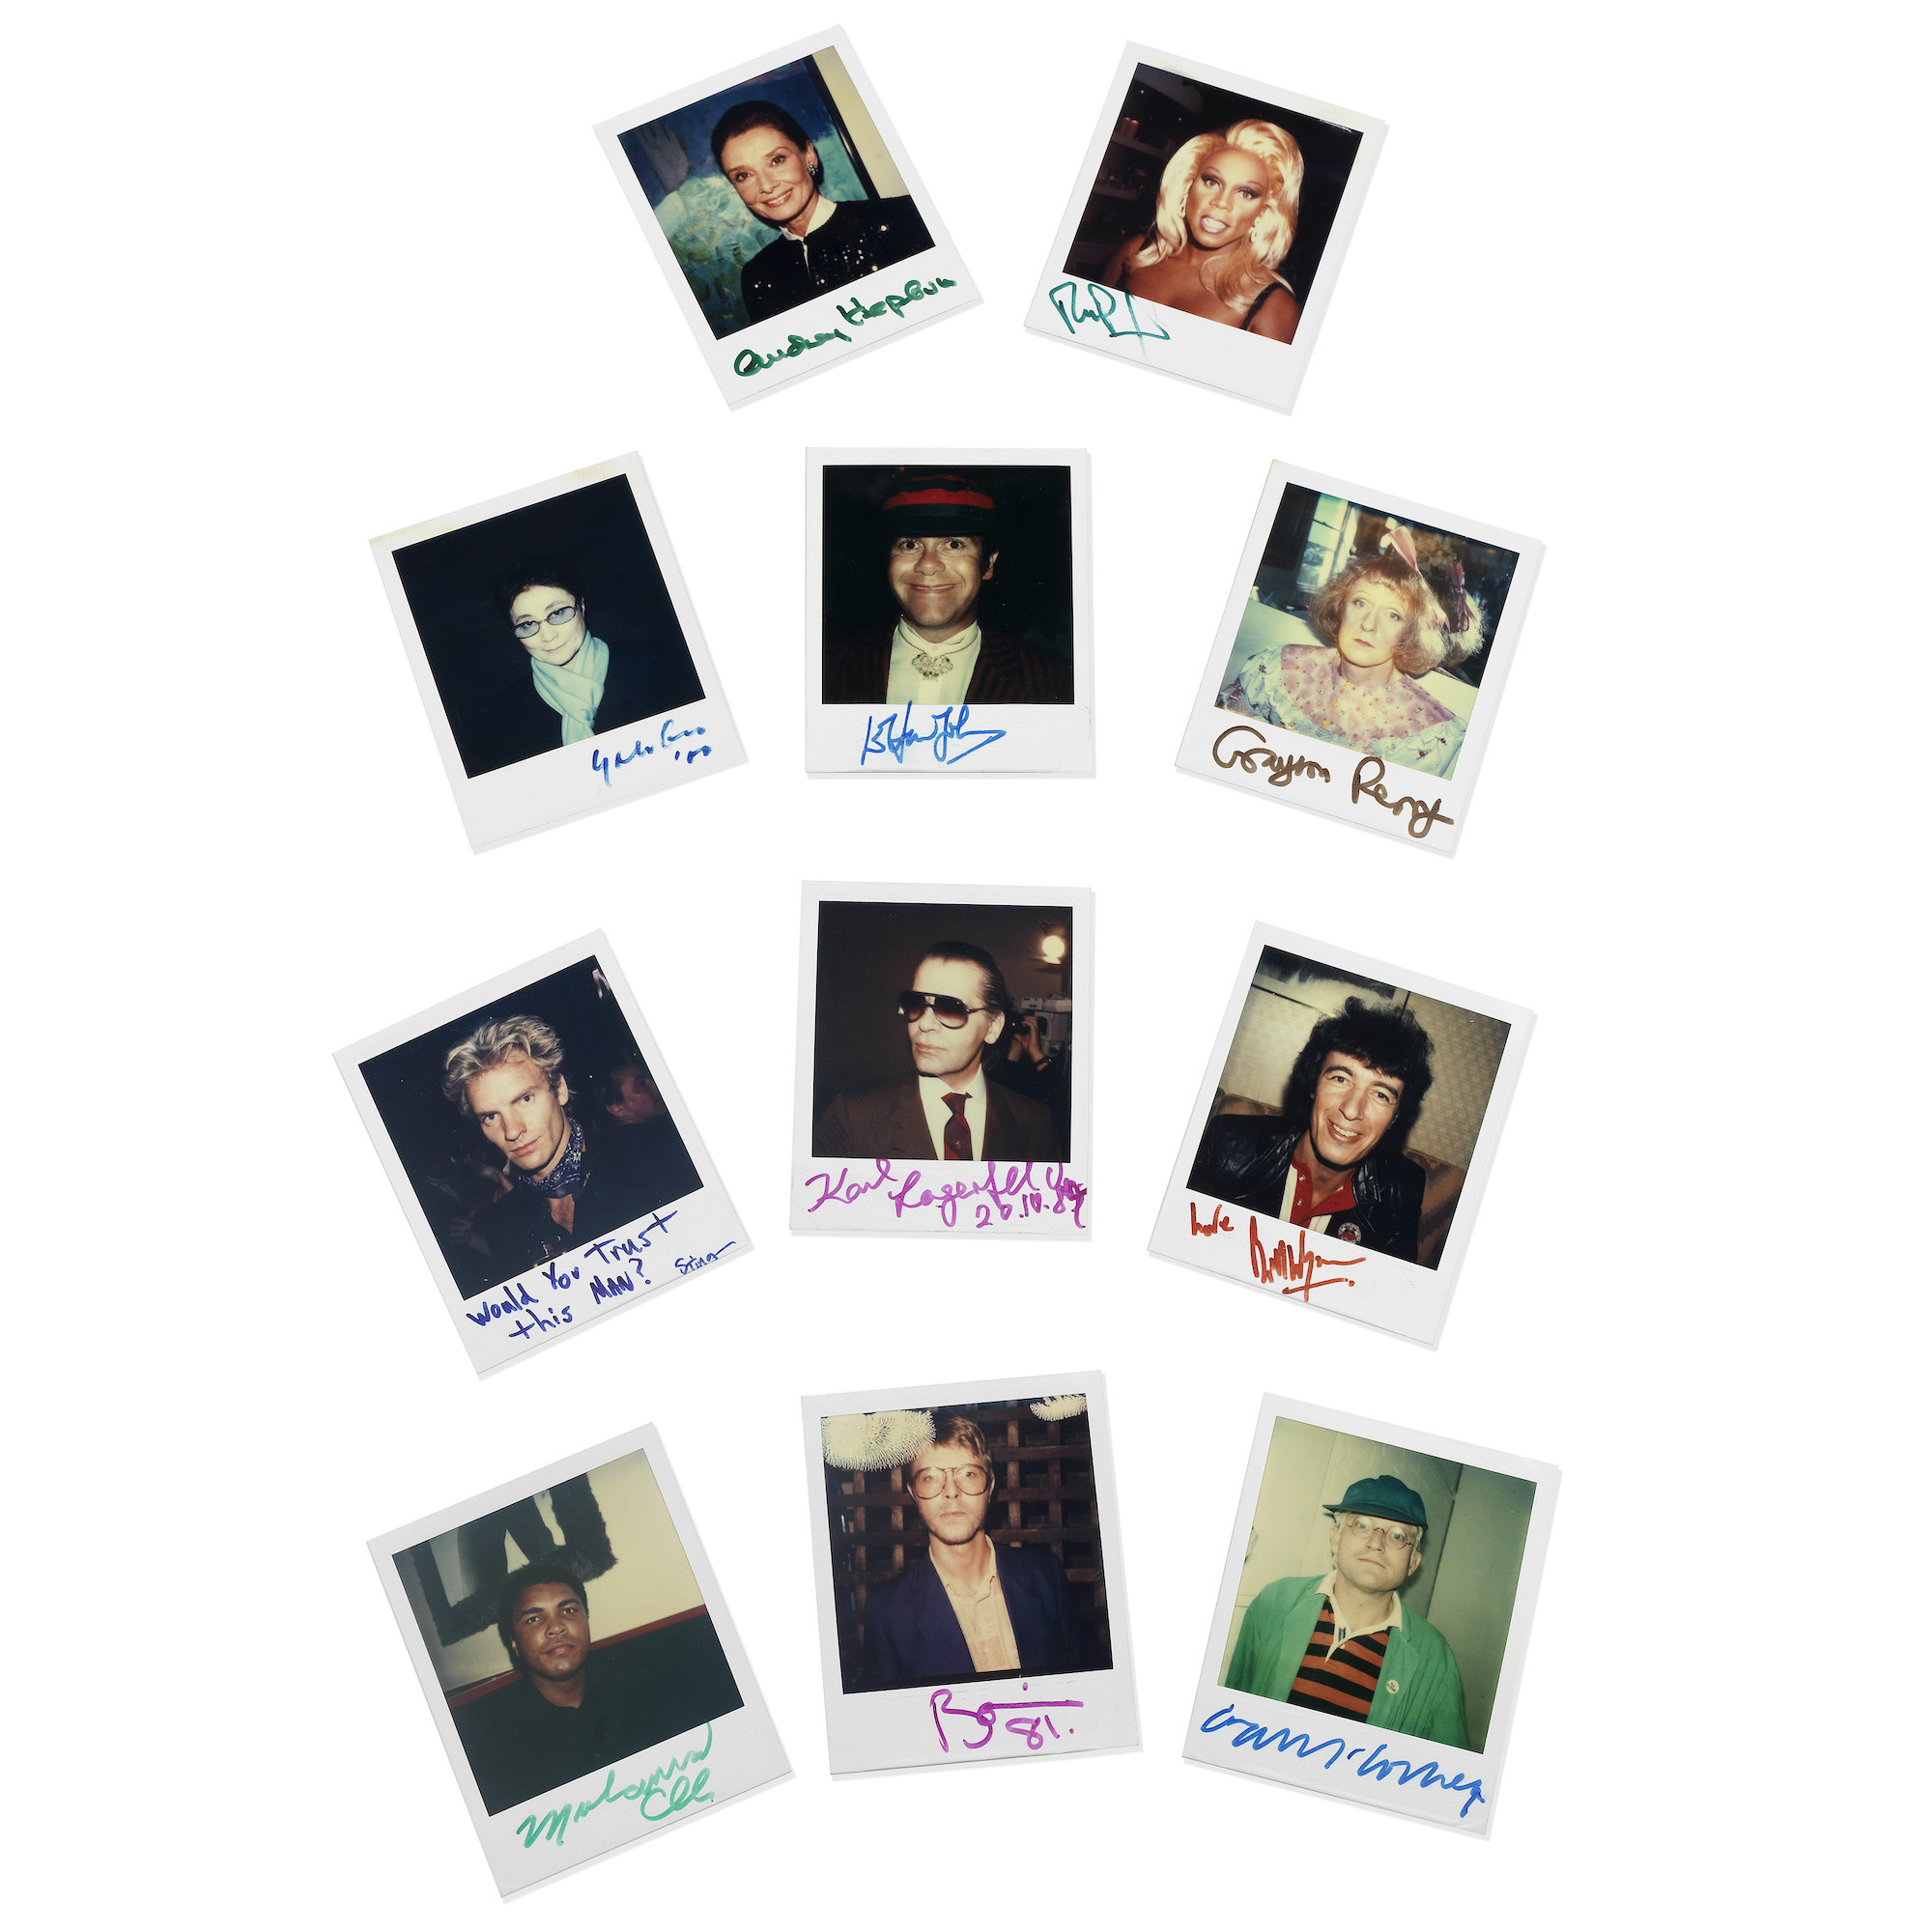 Robert Rosen A Large Group of Vintage Polaroids Taken by Rosen and Signed by Various Film, Music, TV Stars from the 1980s to 2000s